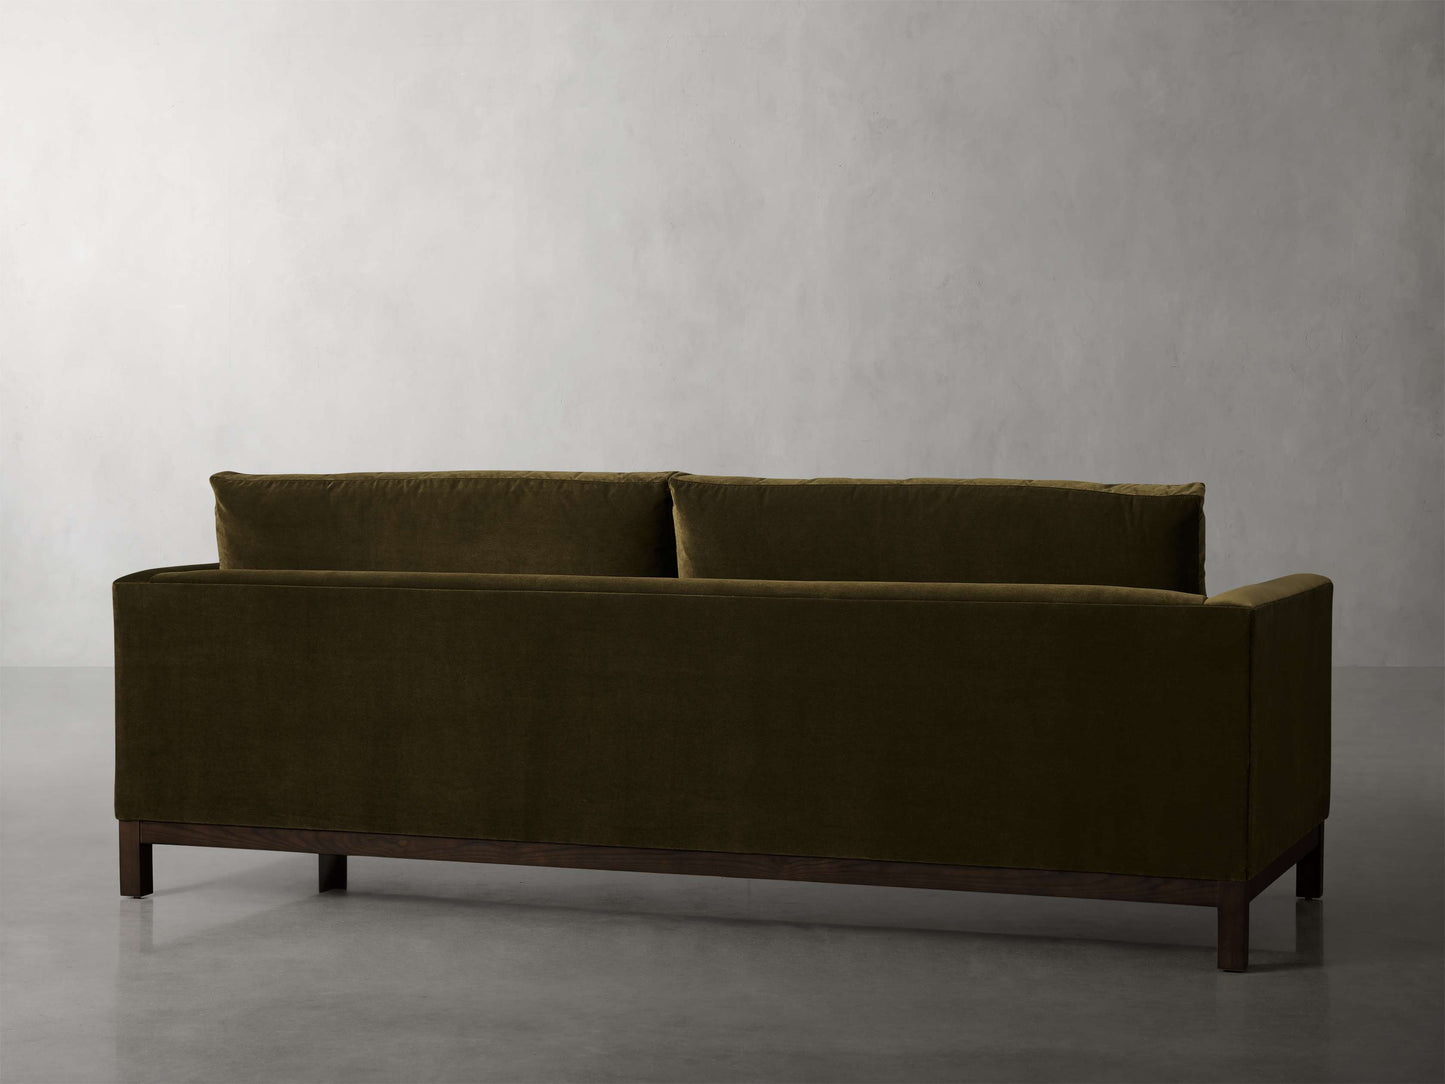 Everett Bench-Seat Sofa by Arhaus (in Vanni Olive)